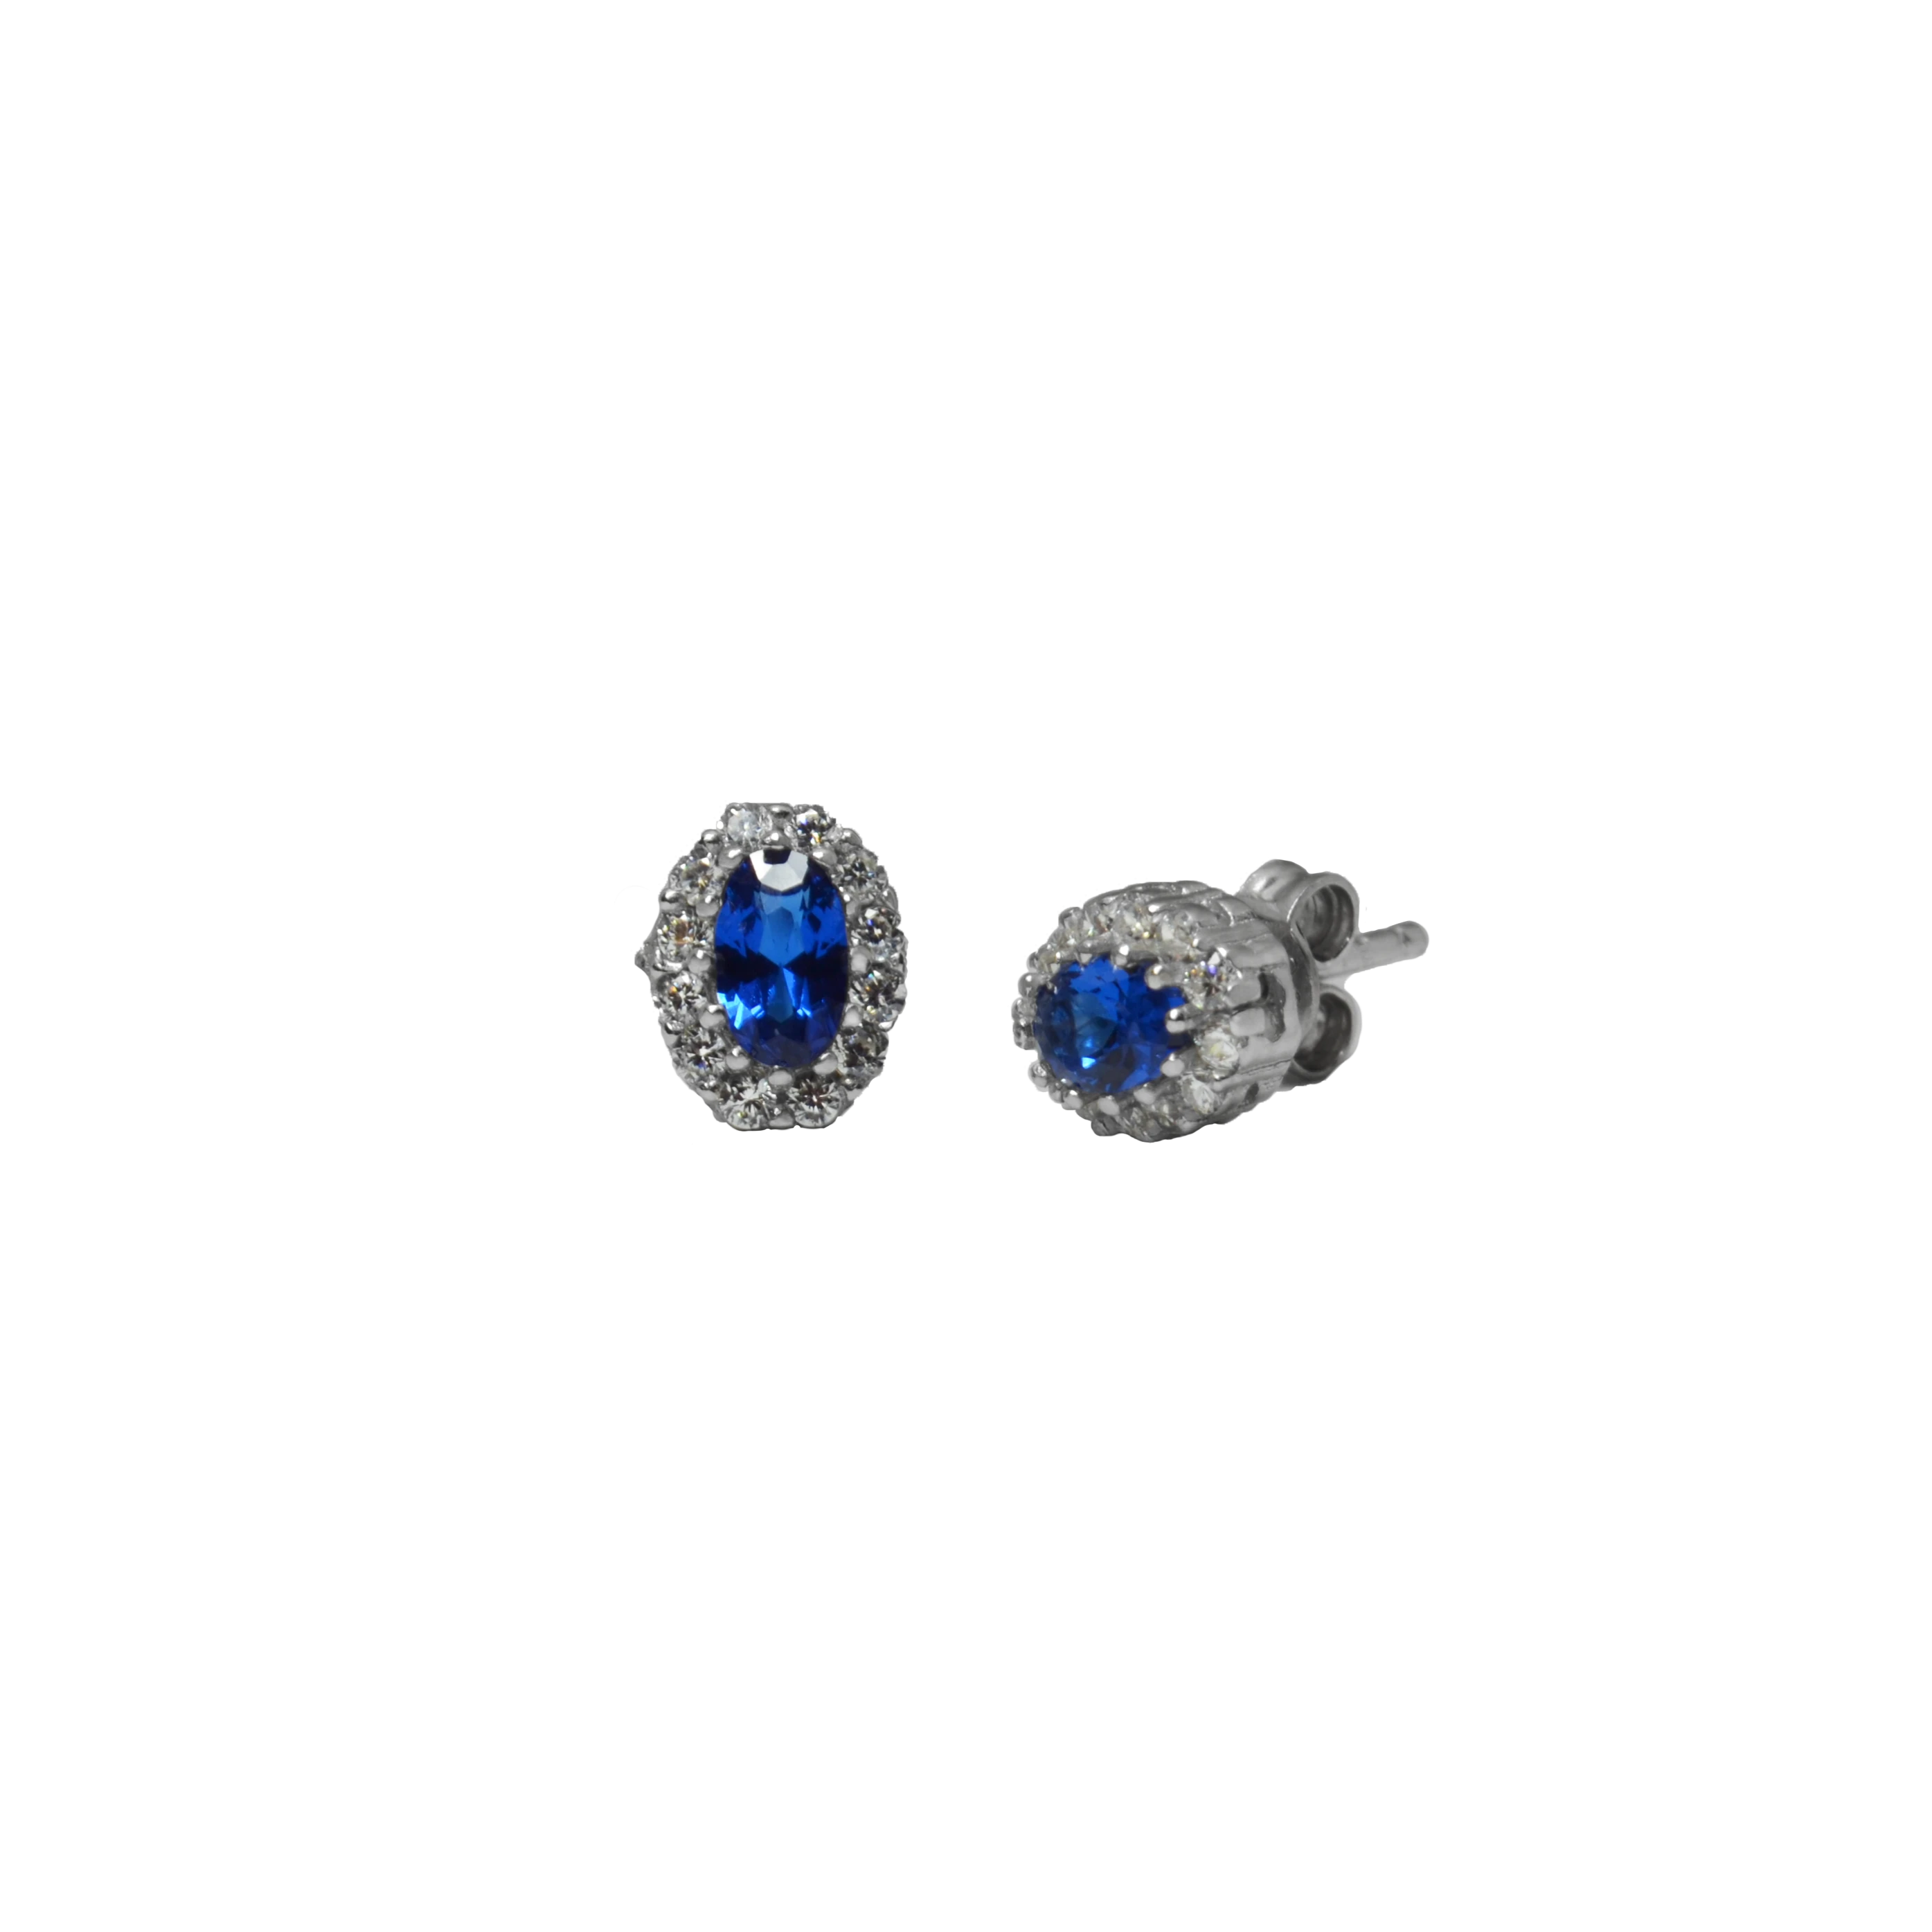 The Mes Me Rize Sapphire Earrings